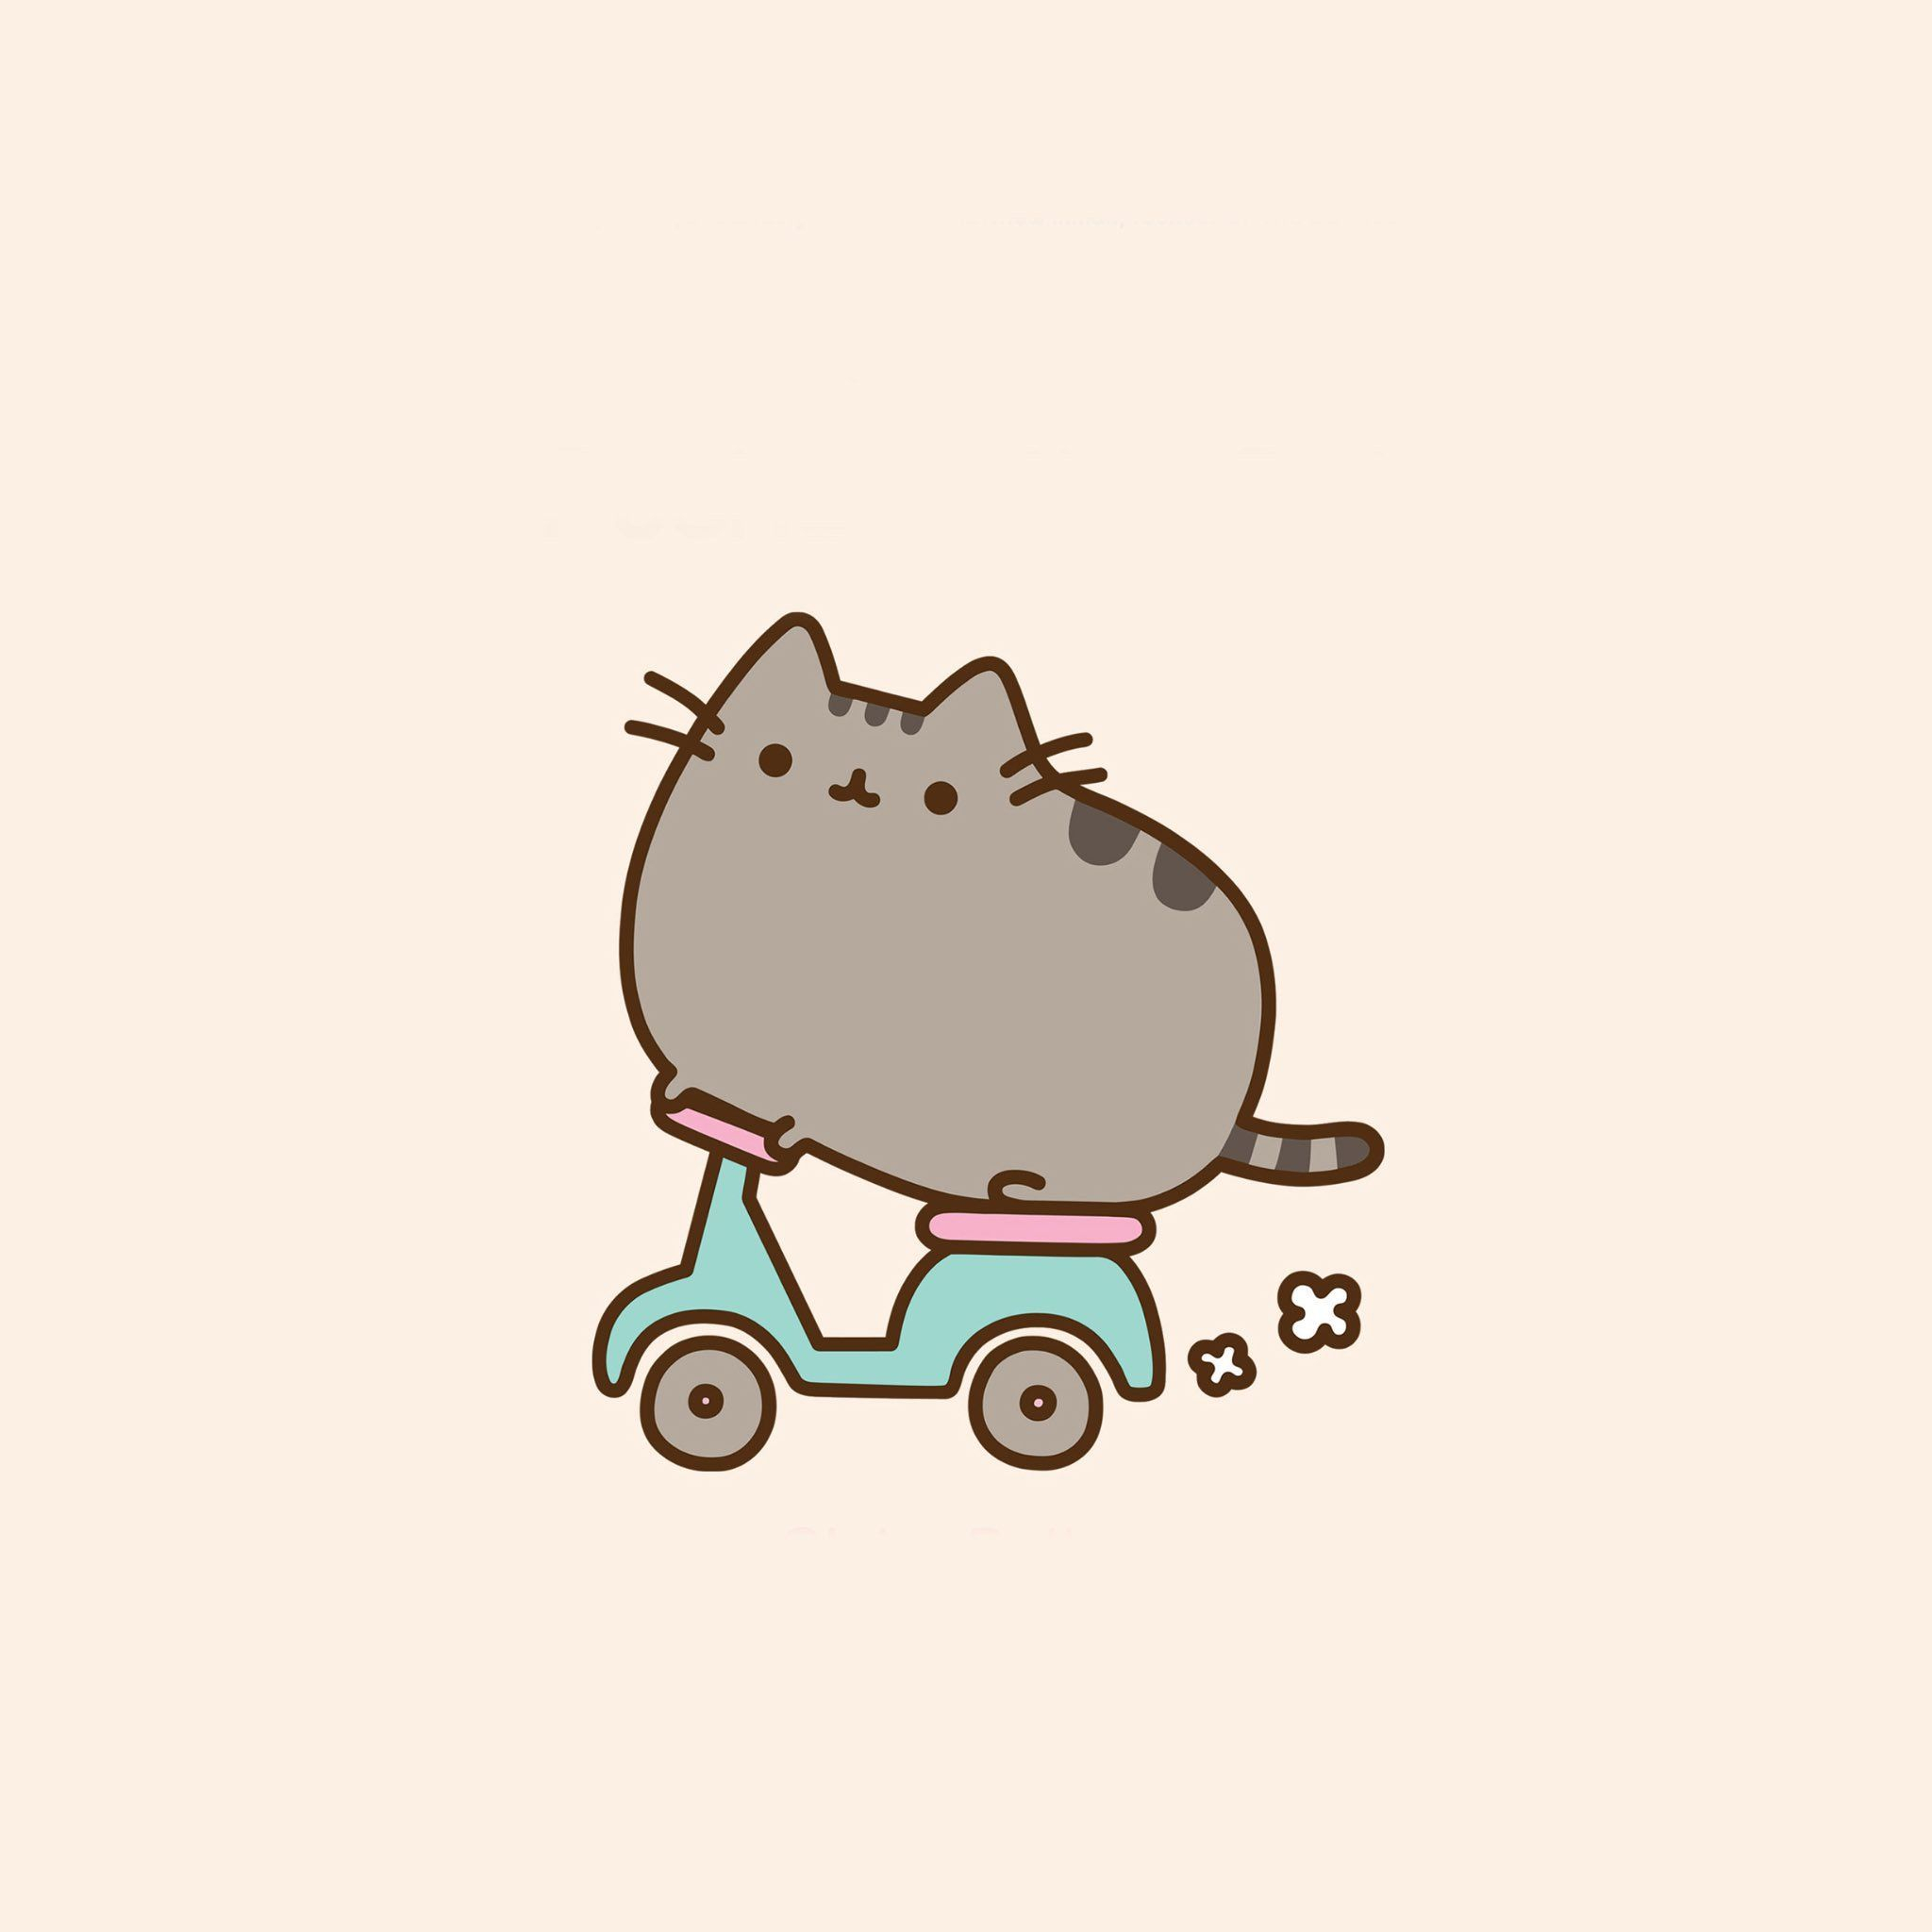 2048x2048 Pusheen Collection See All #Wallpapers : #wallpapers #background #fun | Pusheen cute, Pusheen cat, Pushee